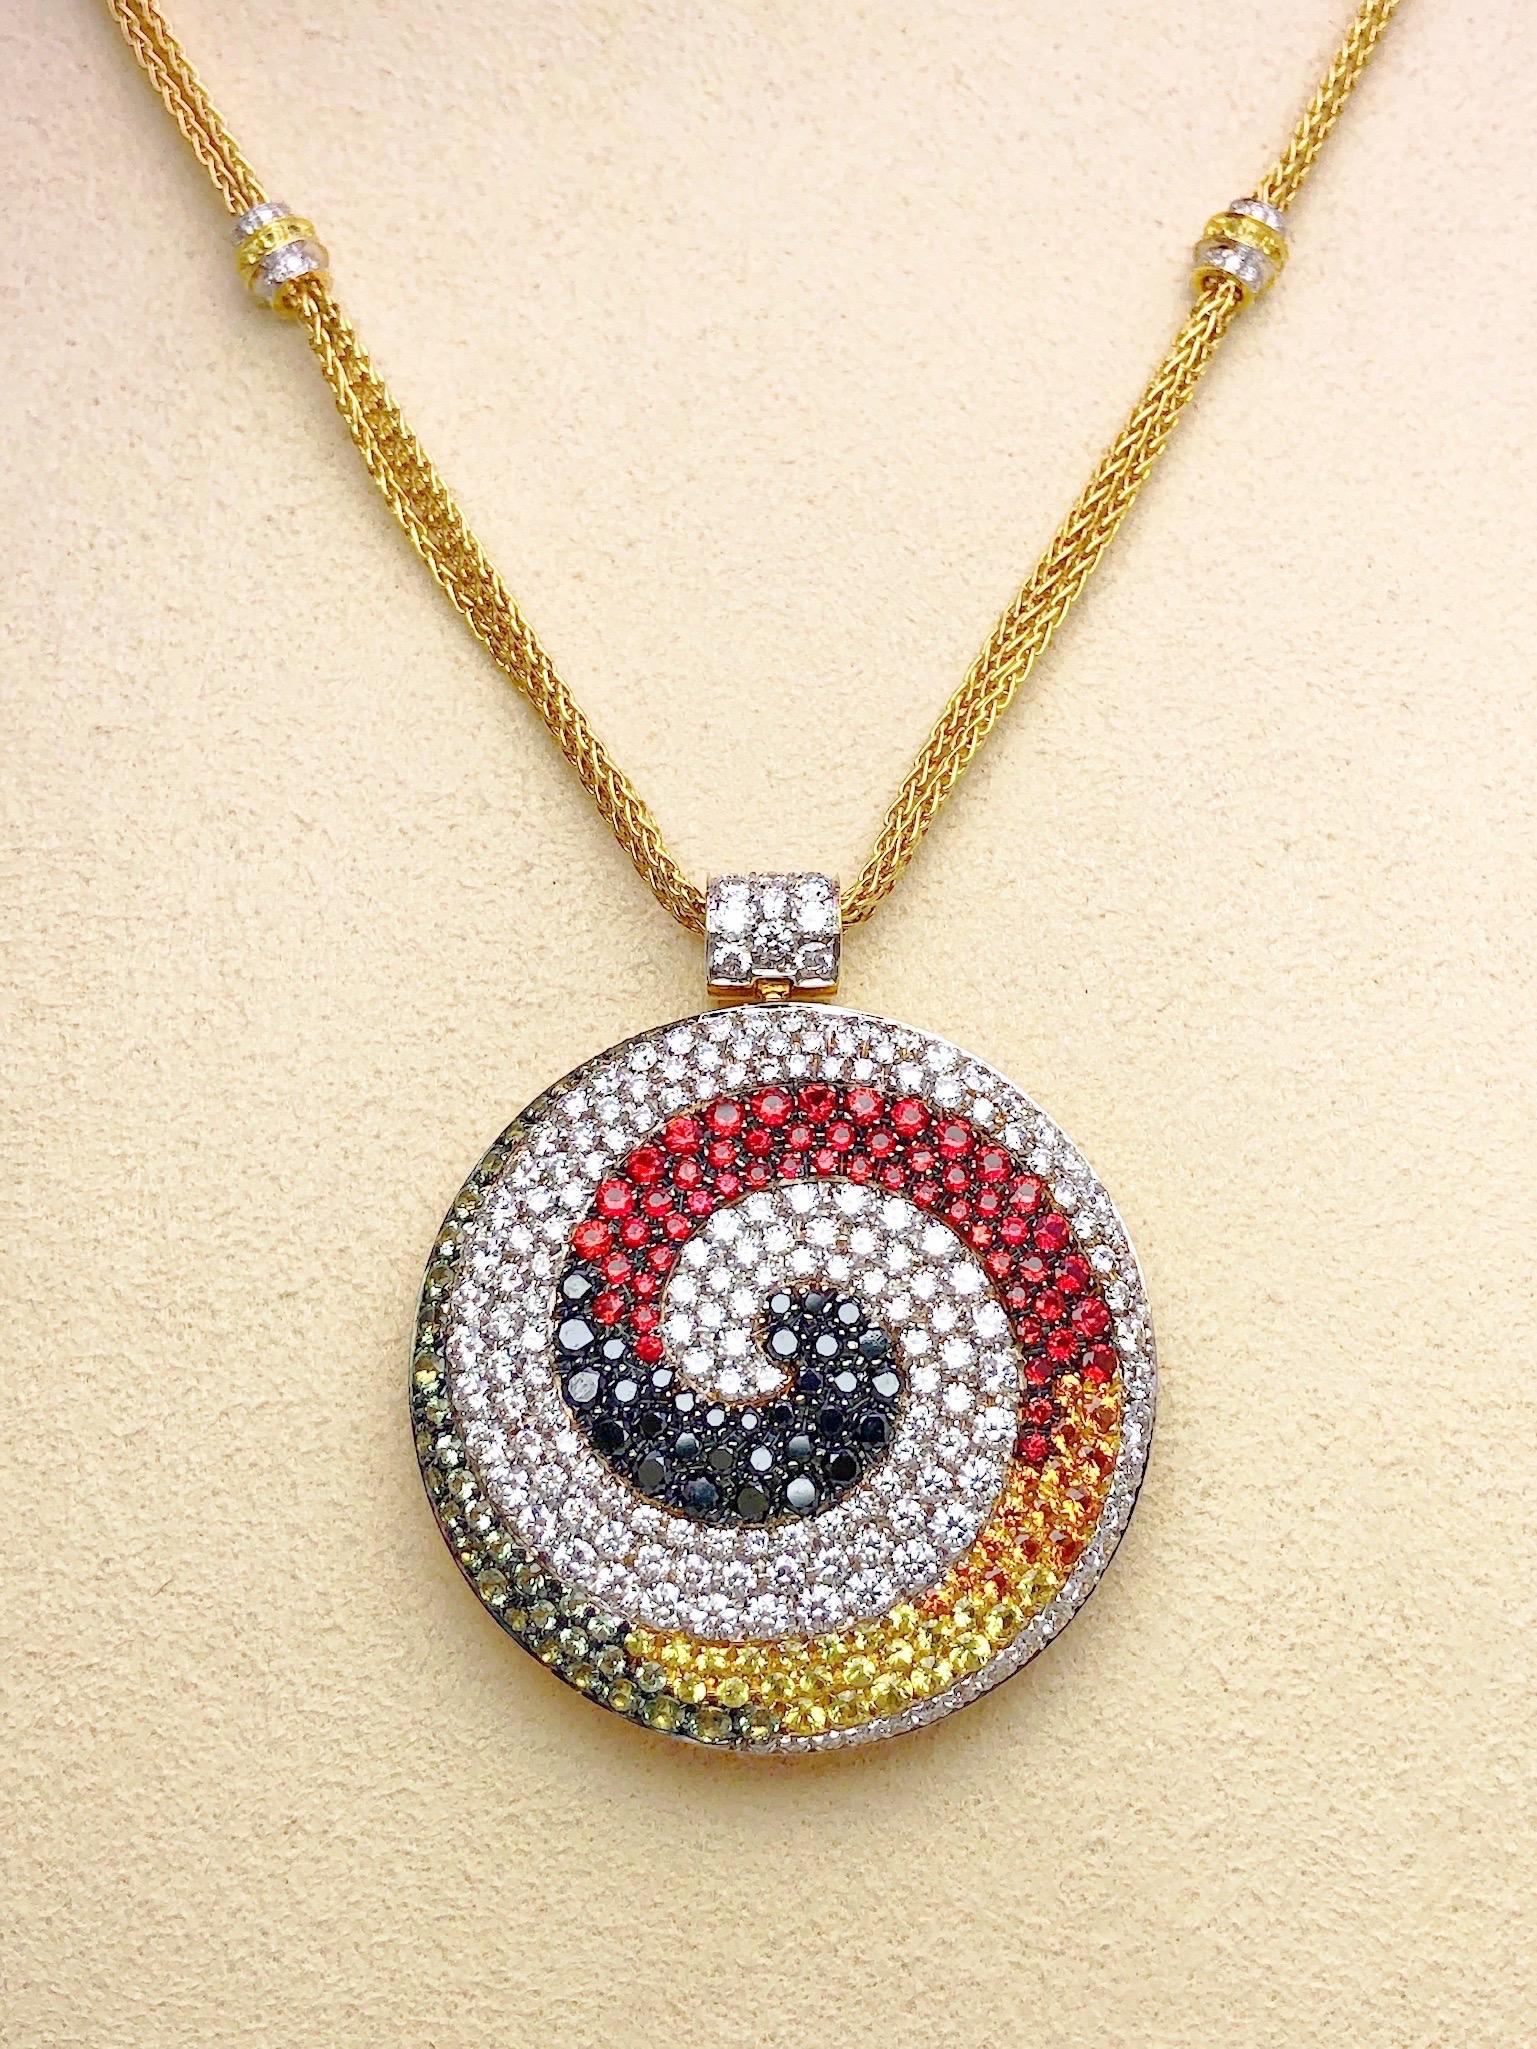 This necklace was designed by Valente of Milan, Italy. The large circular pendant is set in a swirl pattern with Round Brilliant White and Black Diamonds and Multi Colored Sapphires in shades of yellow,orange,red, and light green. The 3 strand